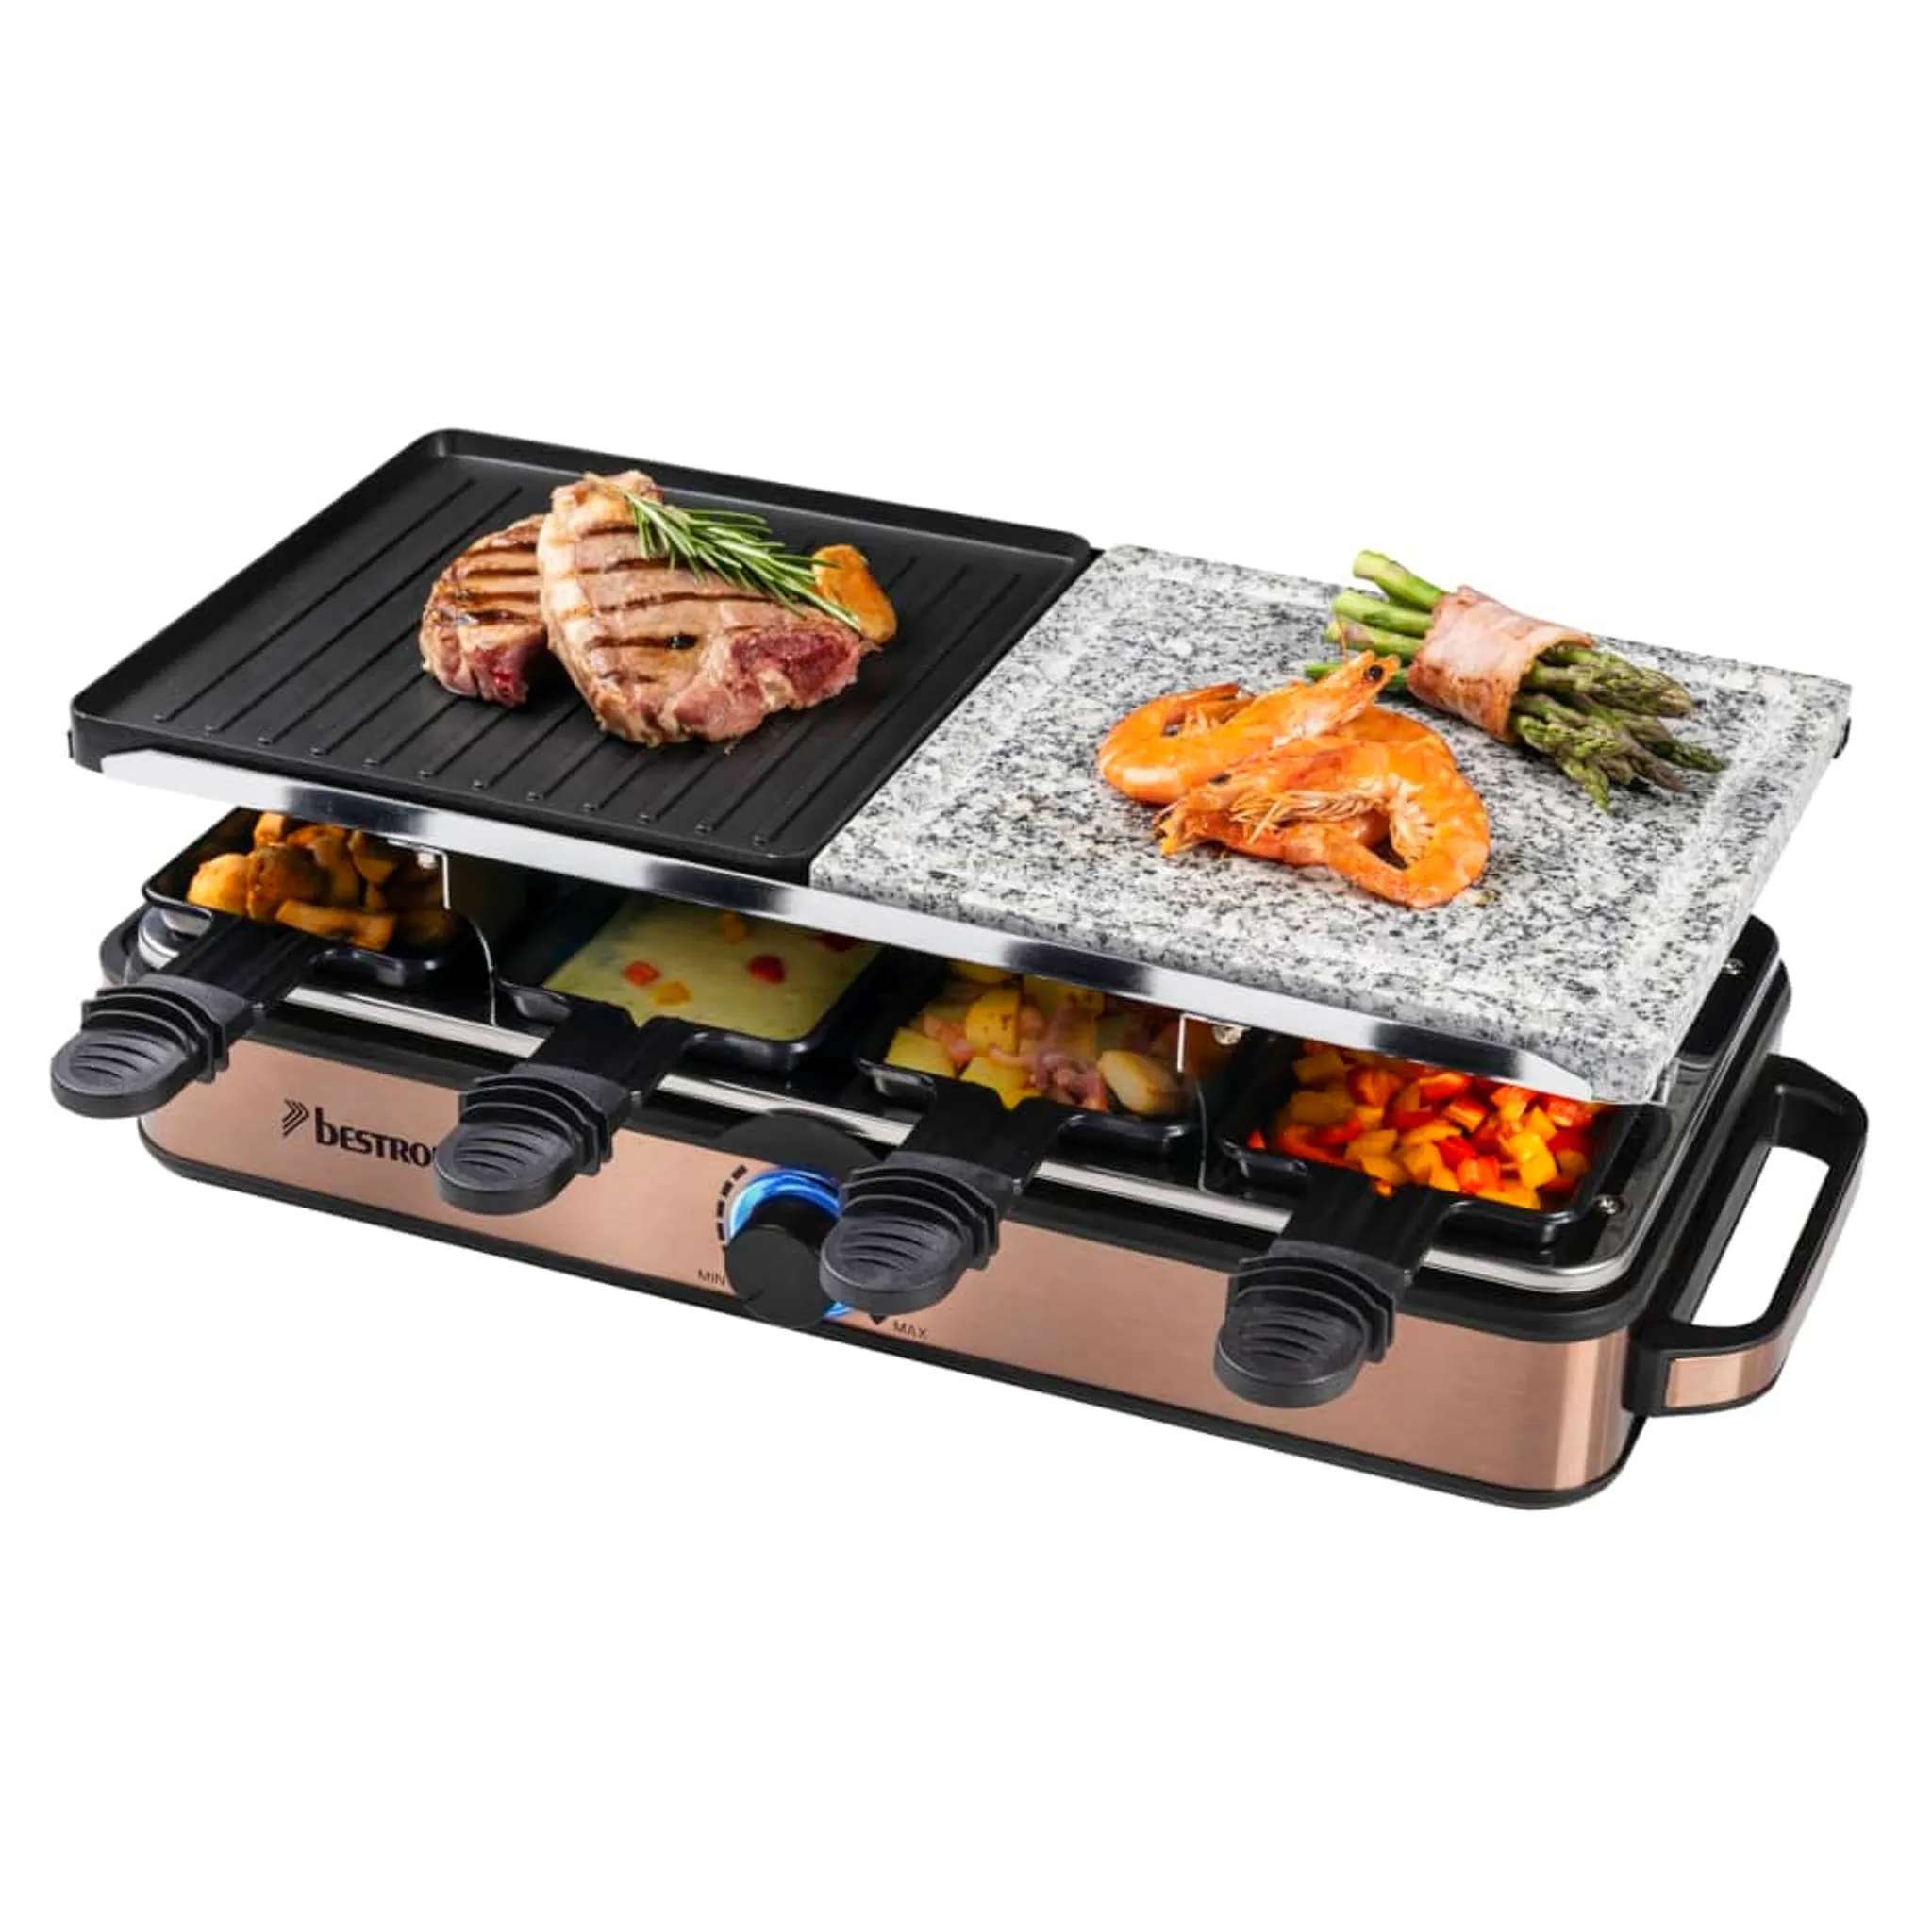 Raclette-Partygrill 2-in-1 Bestron